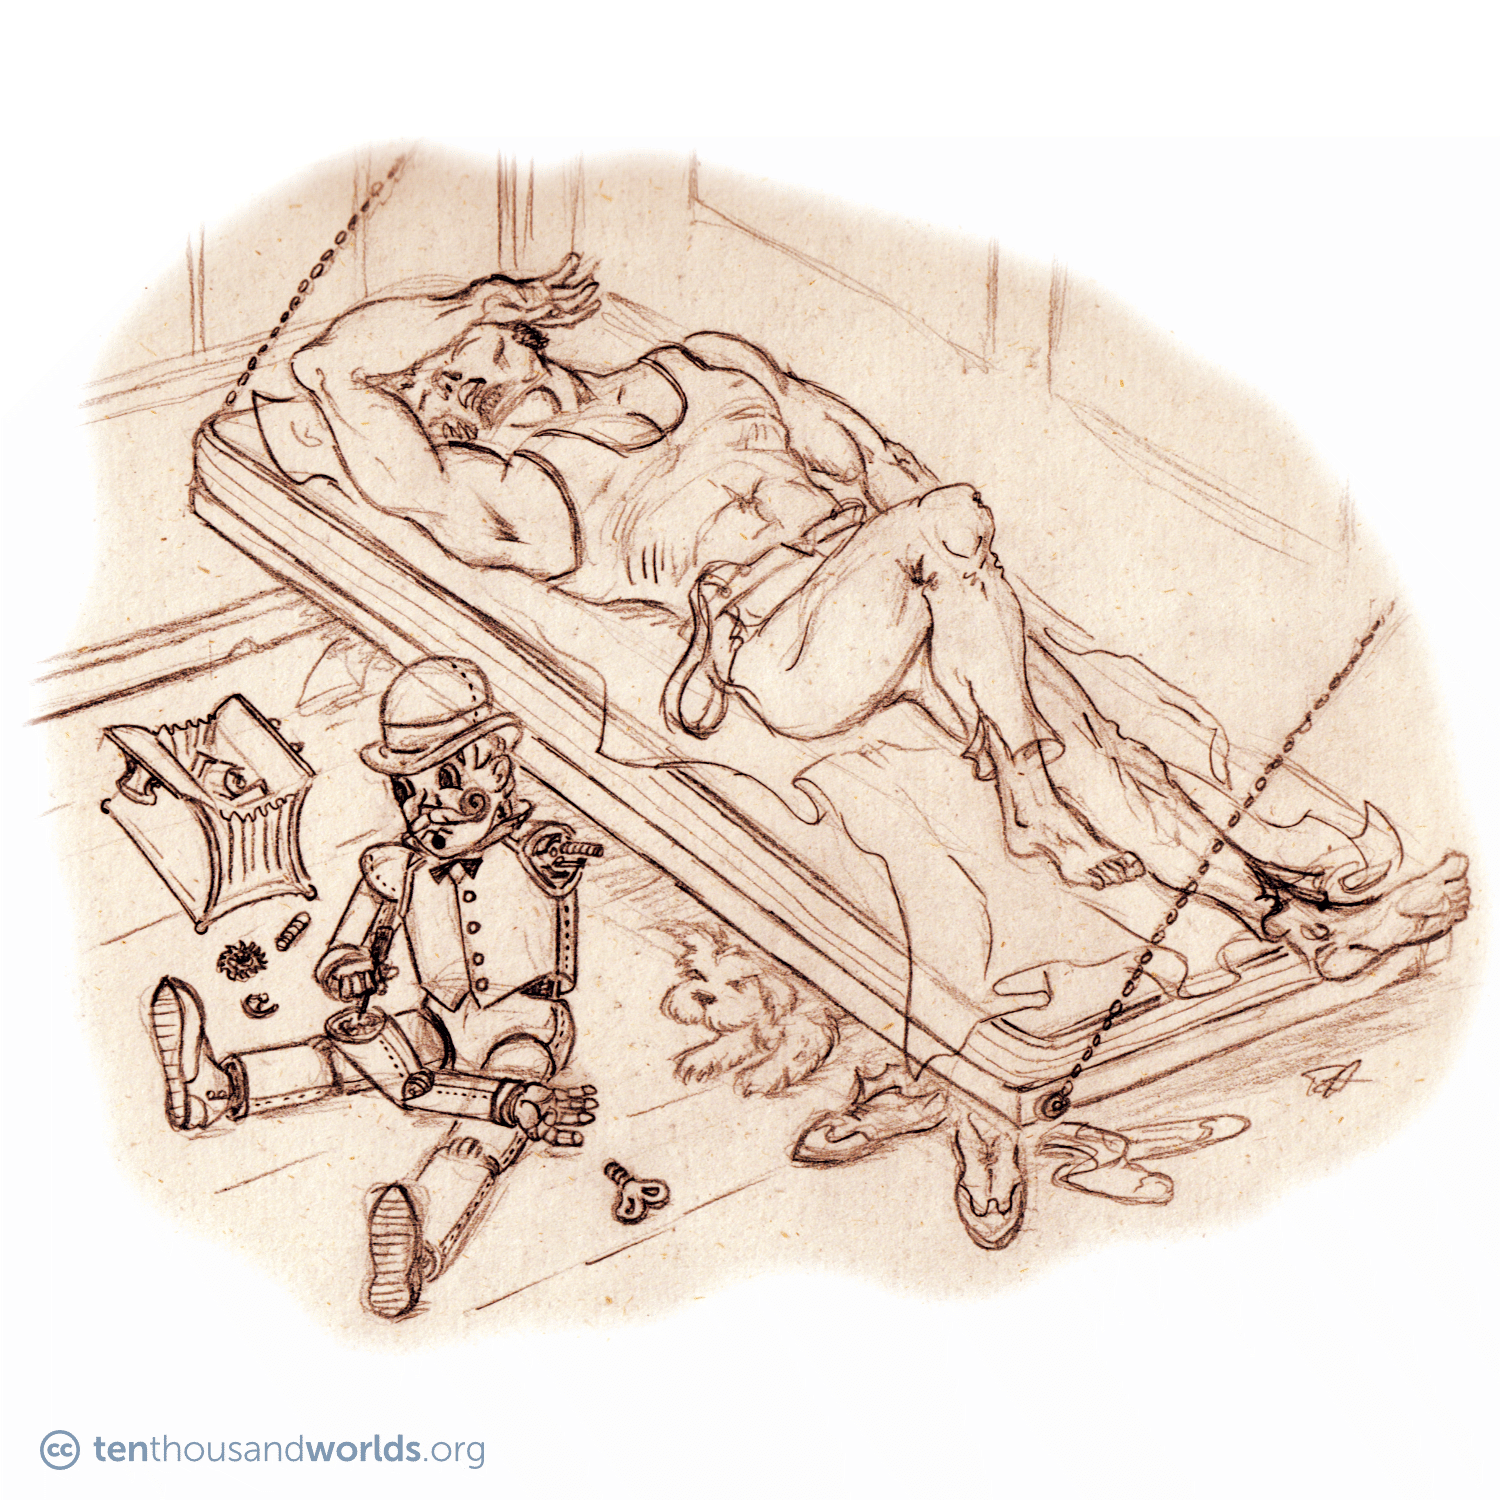 A pencil sketch of a little clockwork man, complete with bowler hat and curled mustache, who sits on the floor amid gears and tools, working on his detached left arm, which he cradles in his lap. Above him, a human sleeps on a cot. Beneath the cot, amid the human’s socks and shoes, a little dog peaks out at the automaton.